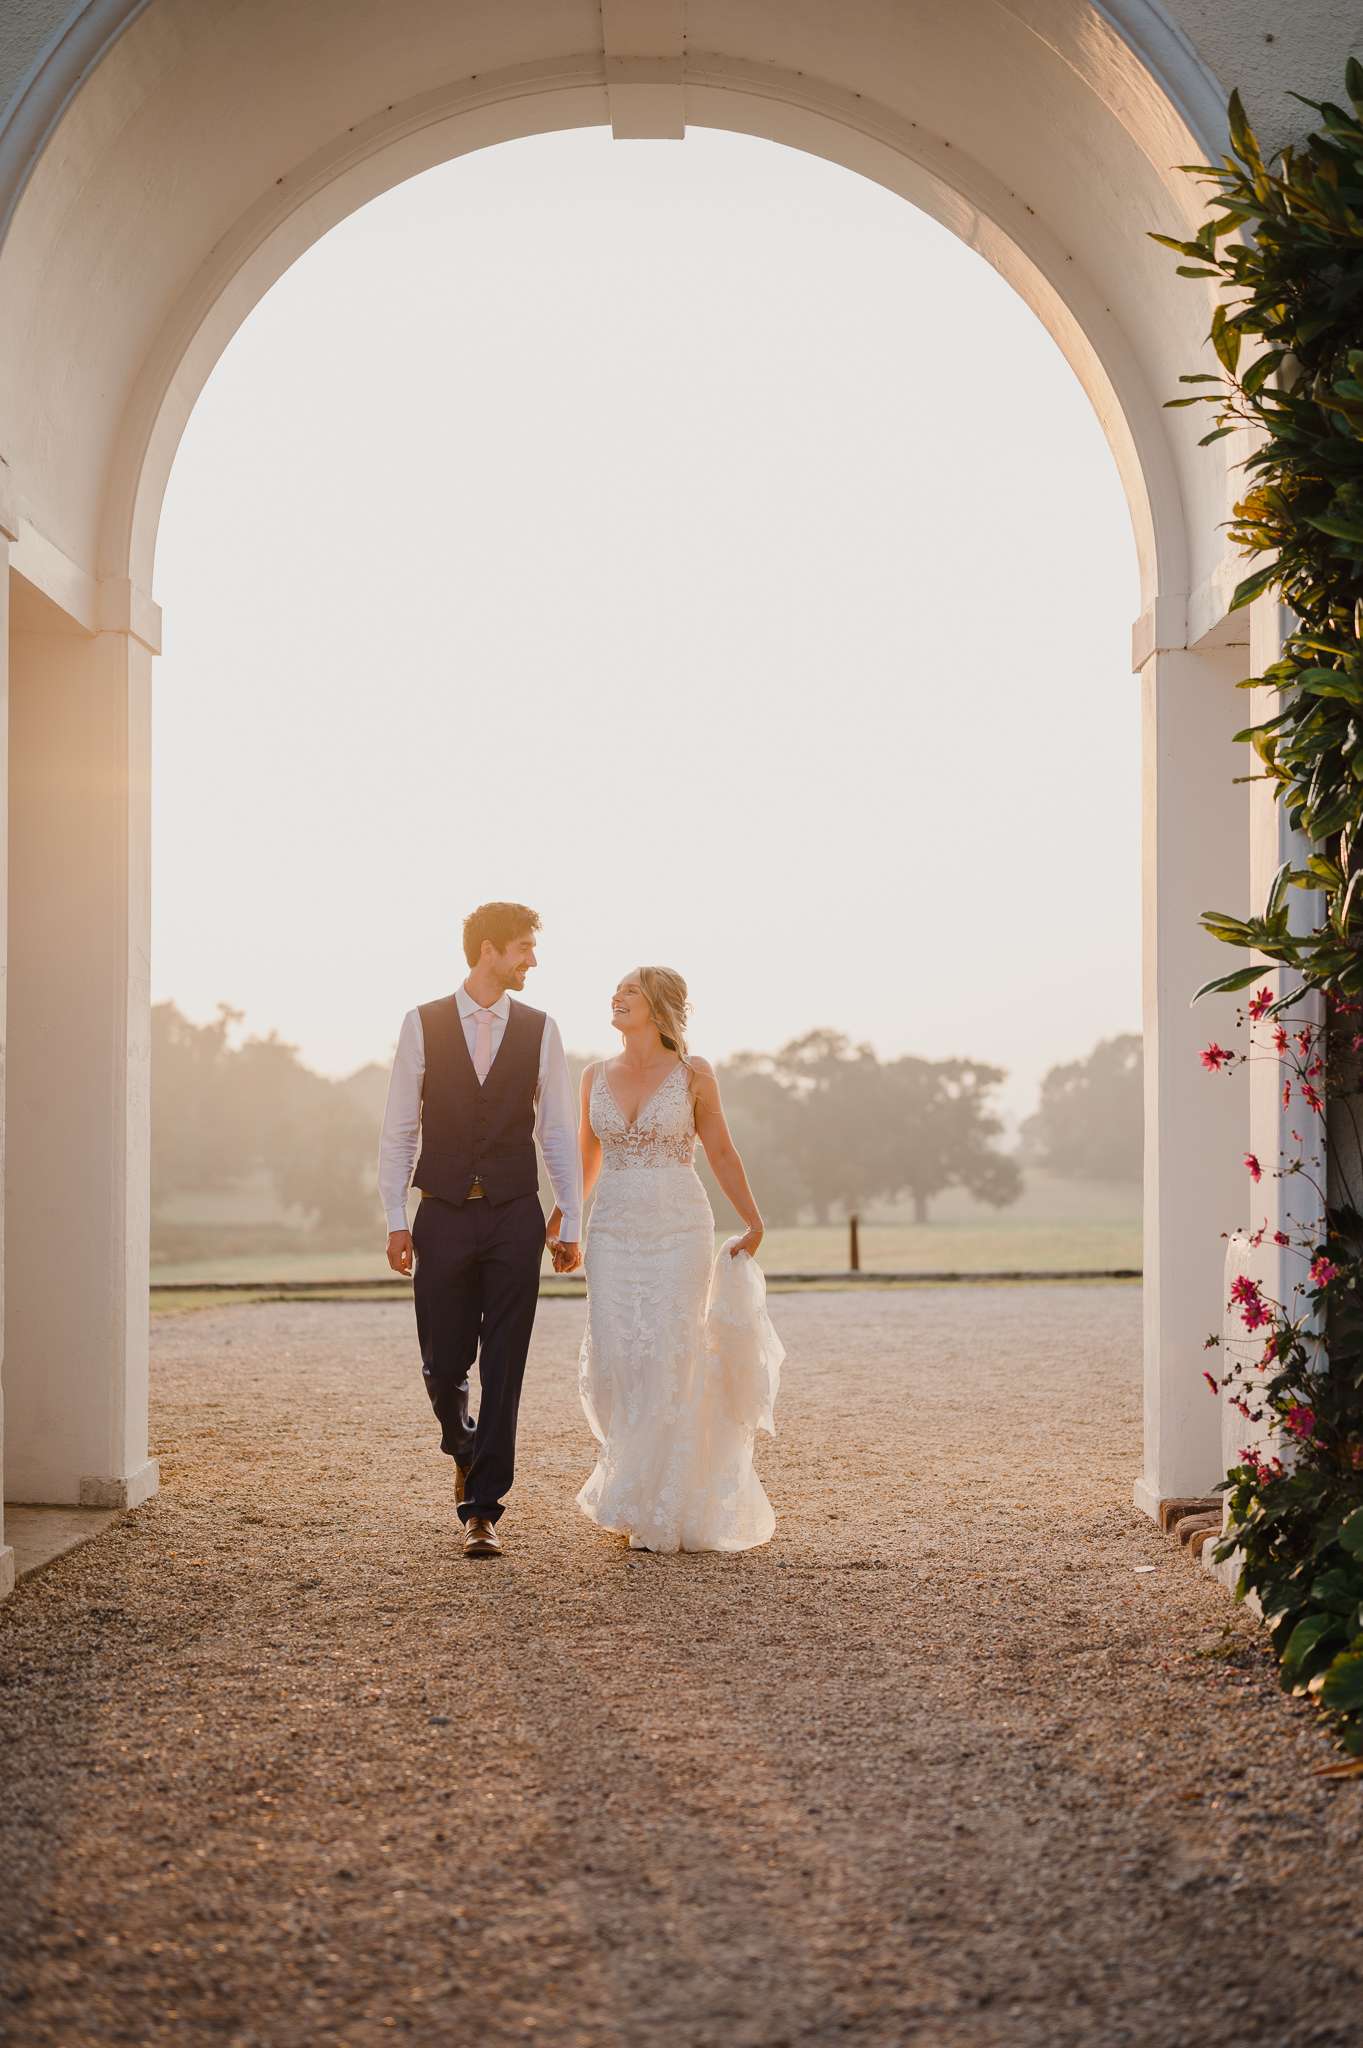 My Top 3 Tips On How To Walk In Front Of The Camera At Your Wedding